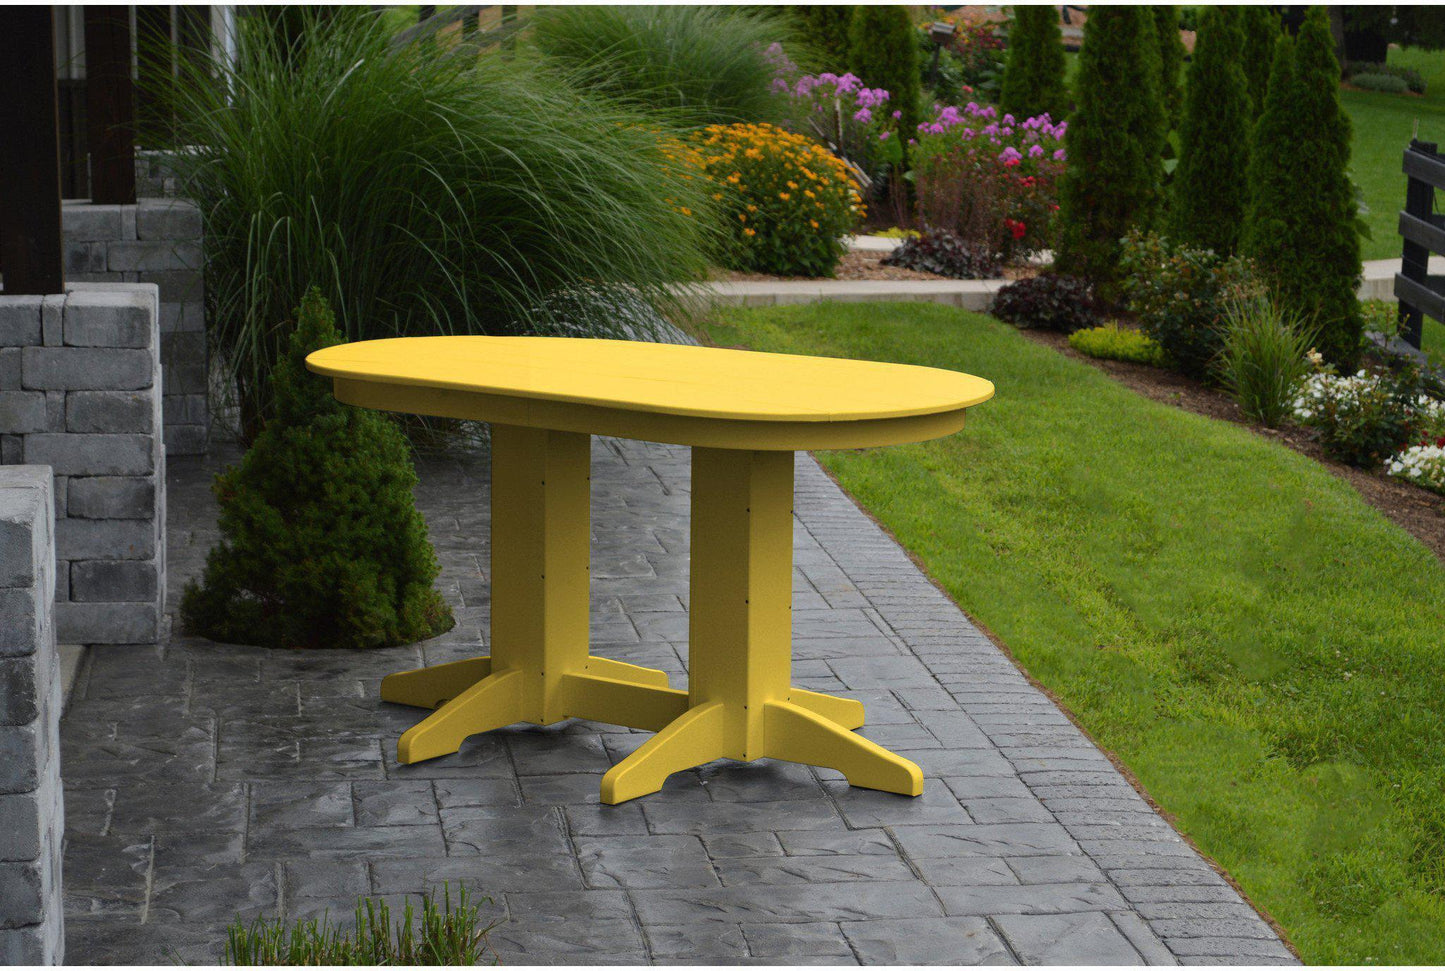 A&L Furniture Company Recycled Plastic 5' Oval Dining Table - Lemon Yellow